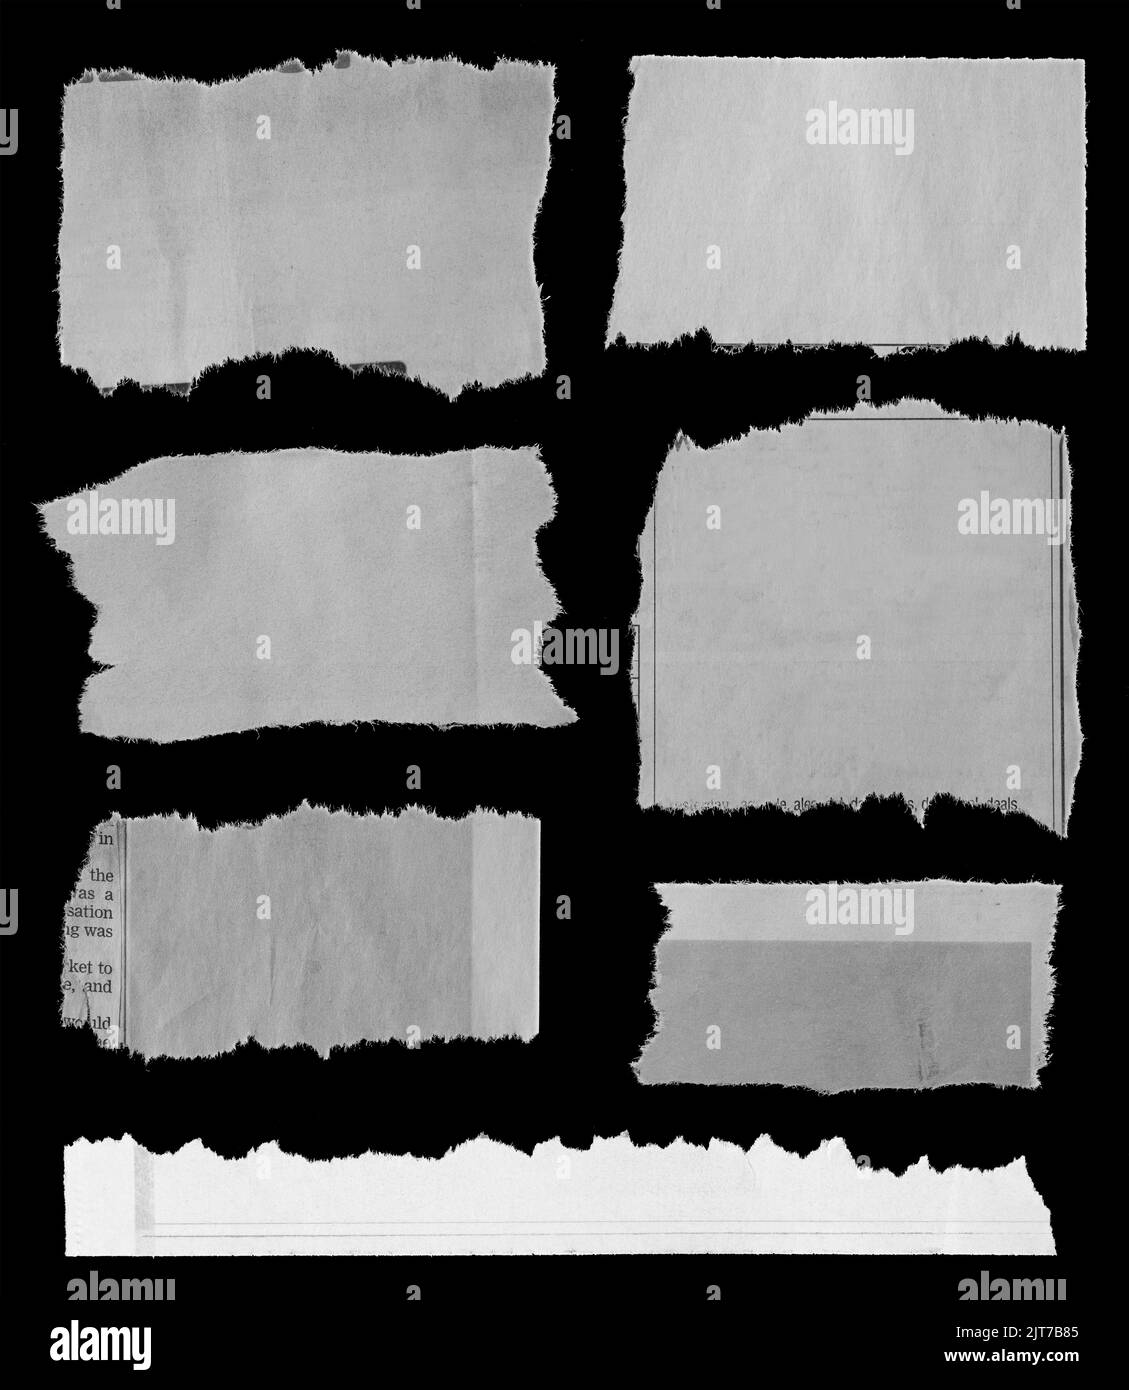 Seven pieces of torn newspaper on black background Stock Photo